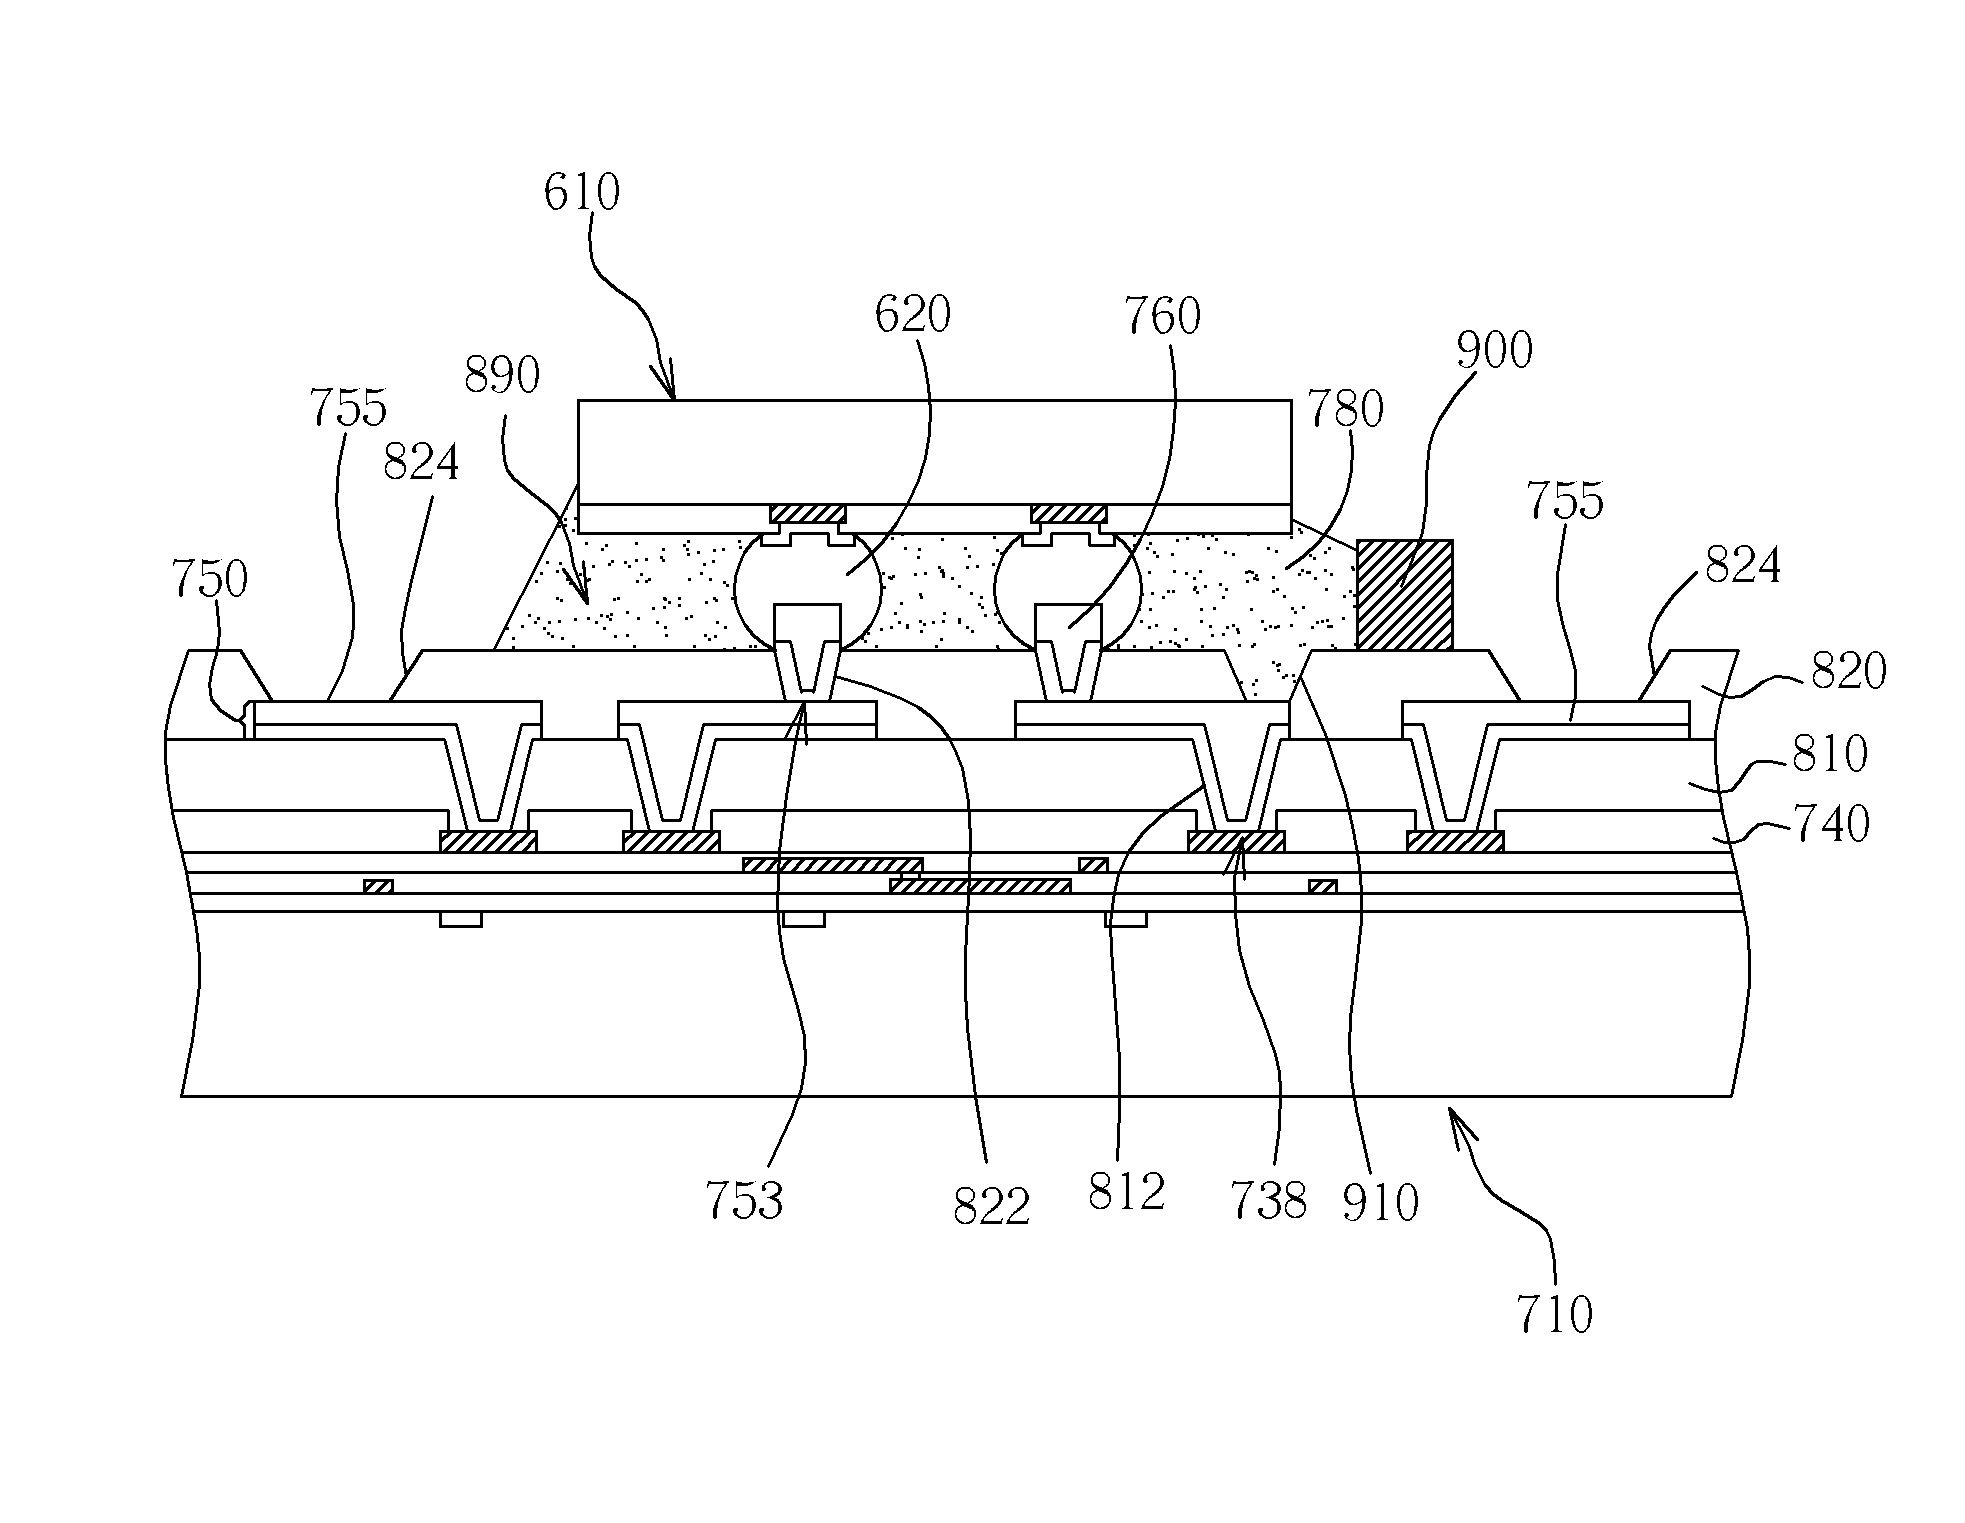 Chip package with dam bar restricting flow of underfill